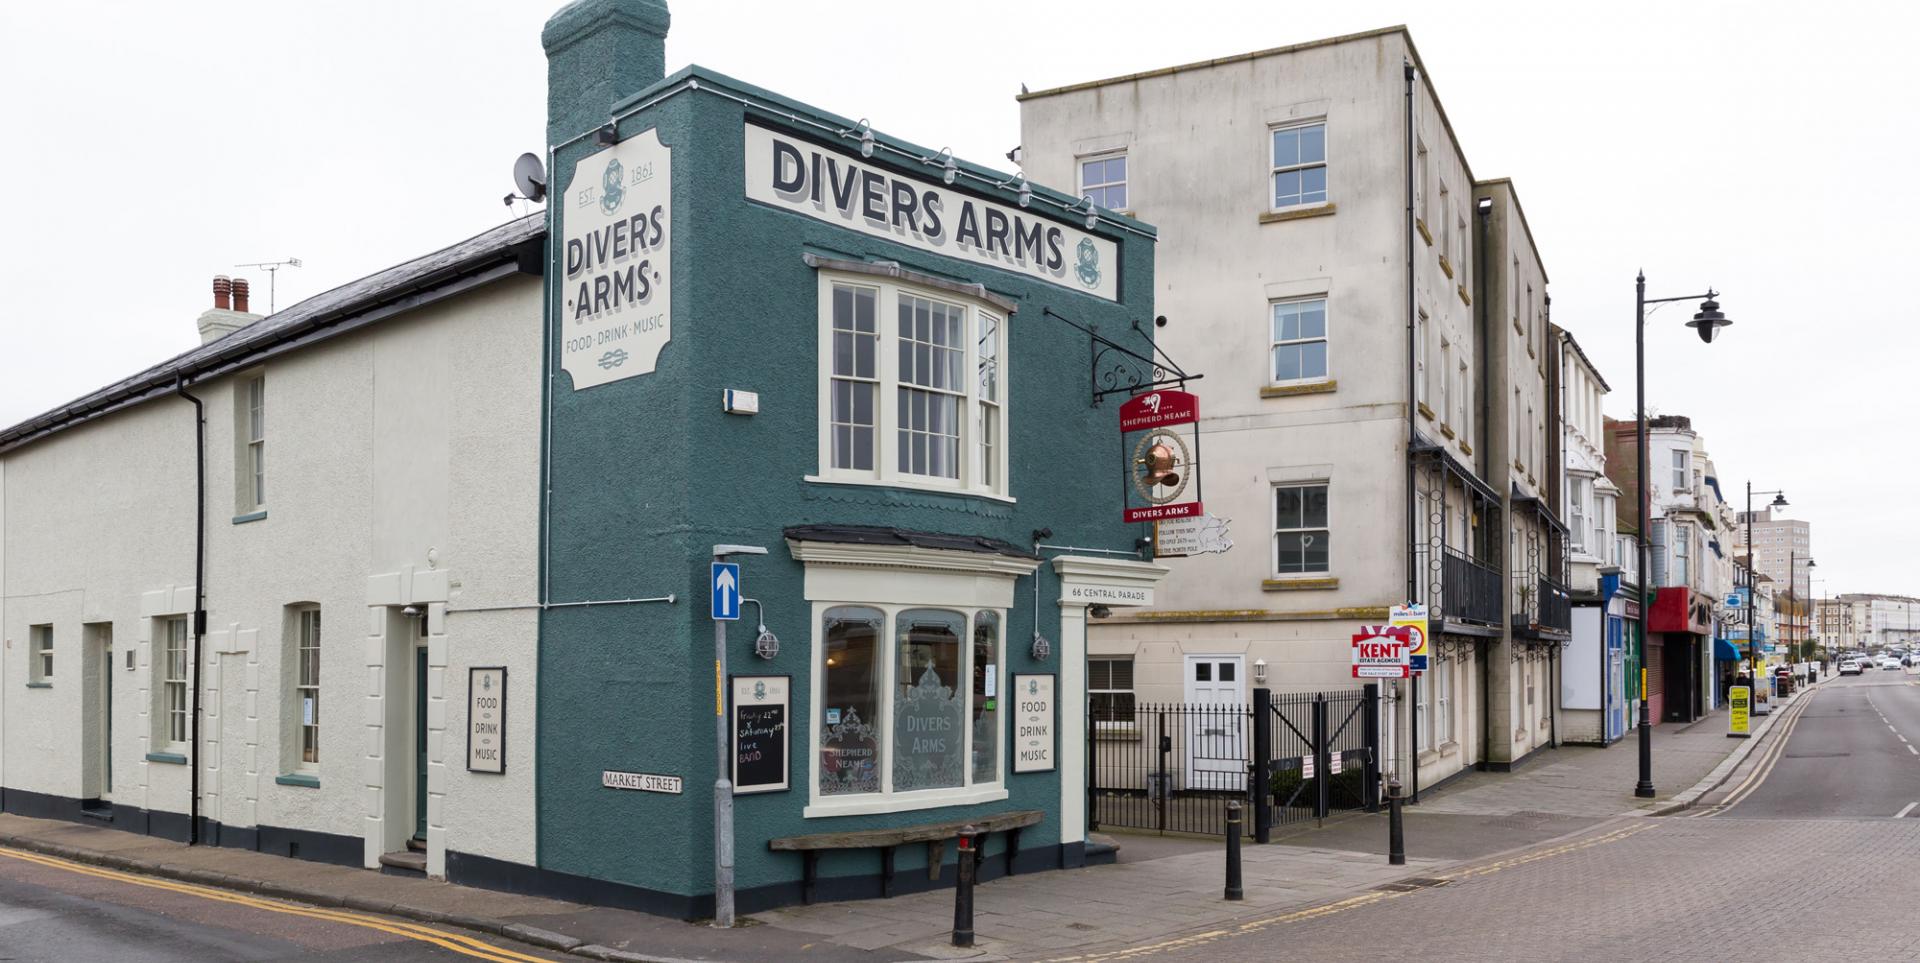 divers_arms_herne_bay_27-1